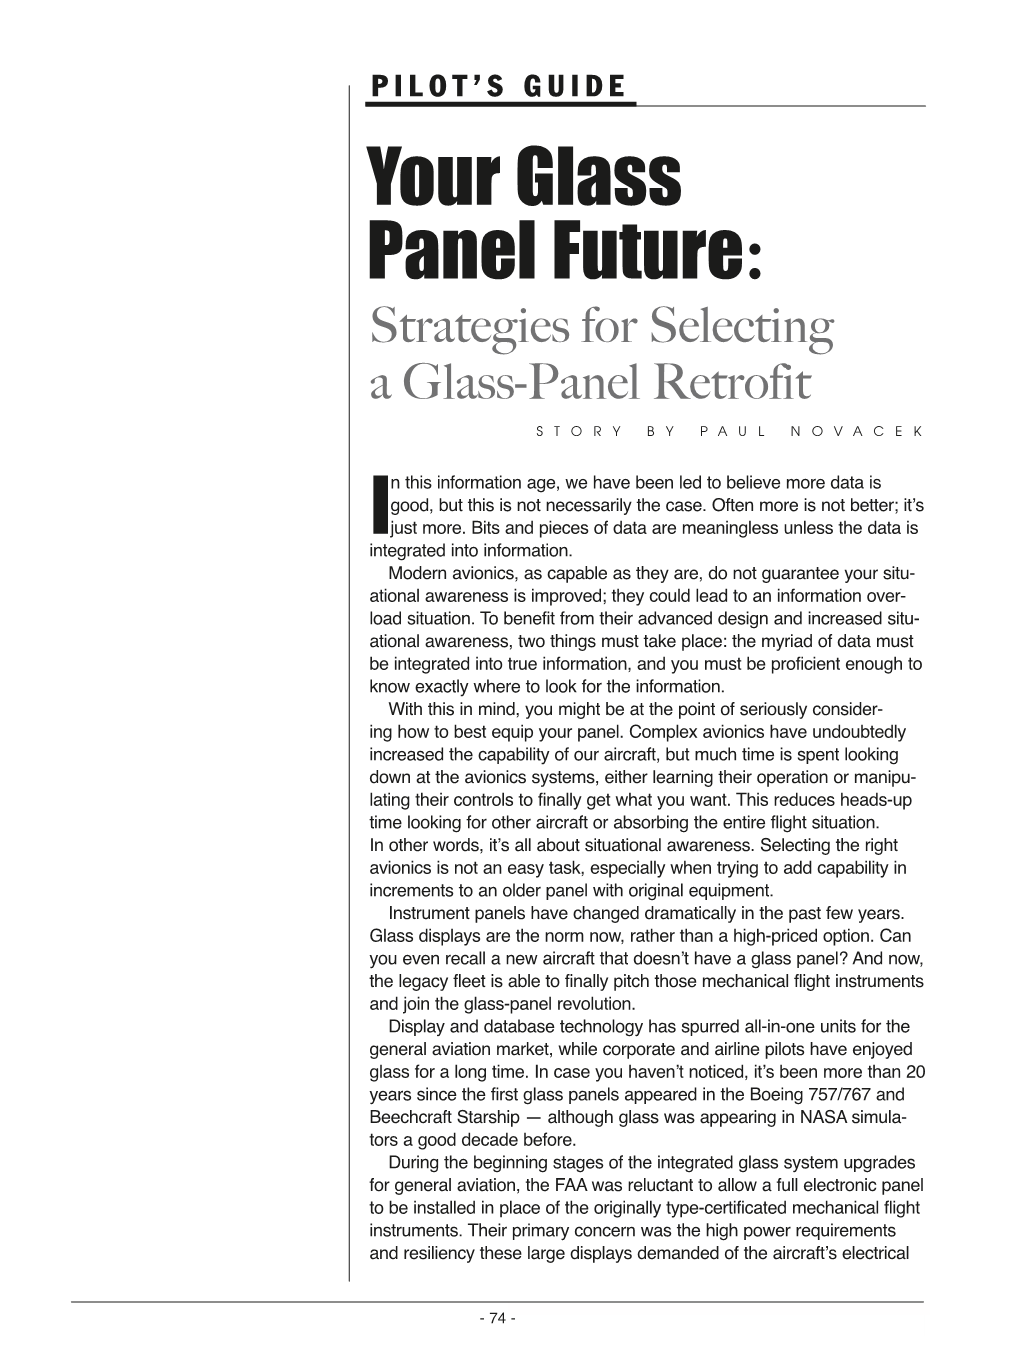 Your Glass Panel Future: Strategies for Selecting a Glass-Panel Retrofit